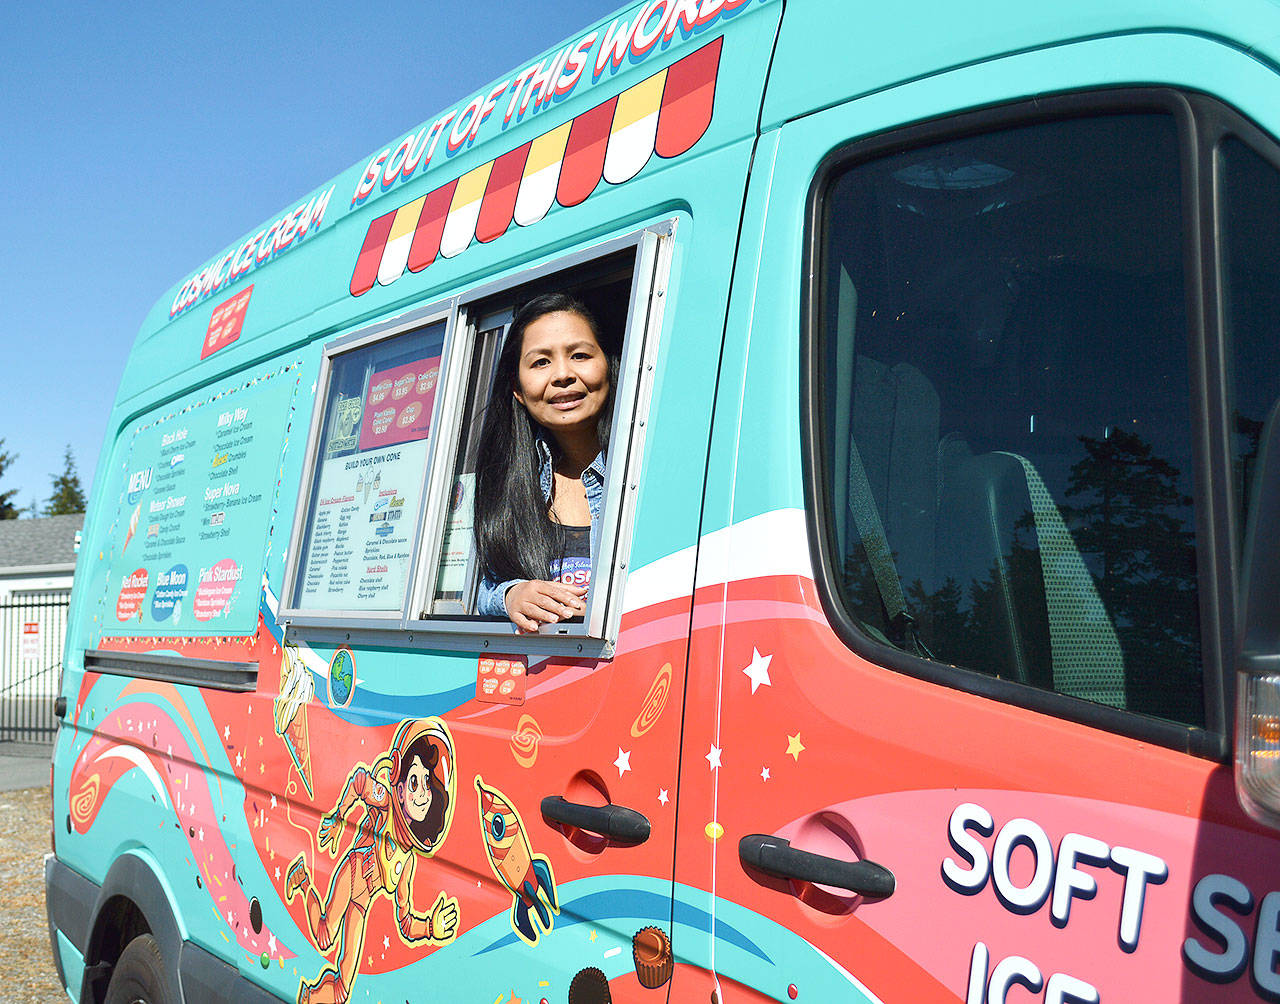 Glaiza Price, who owns and operates Cosmic Ice Cream with her husband Patrick, peeks out the van’s window. The space-themed van has started popping up at events this year to serve 24 flavors of soft serve ice cream. Photo by Laura Guido/Whidbey News-Times